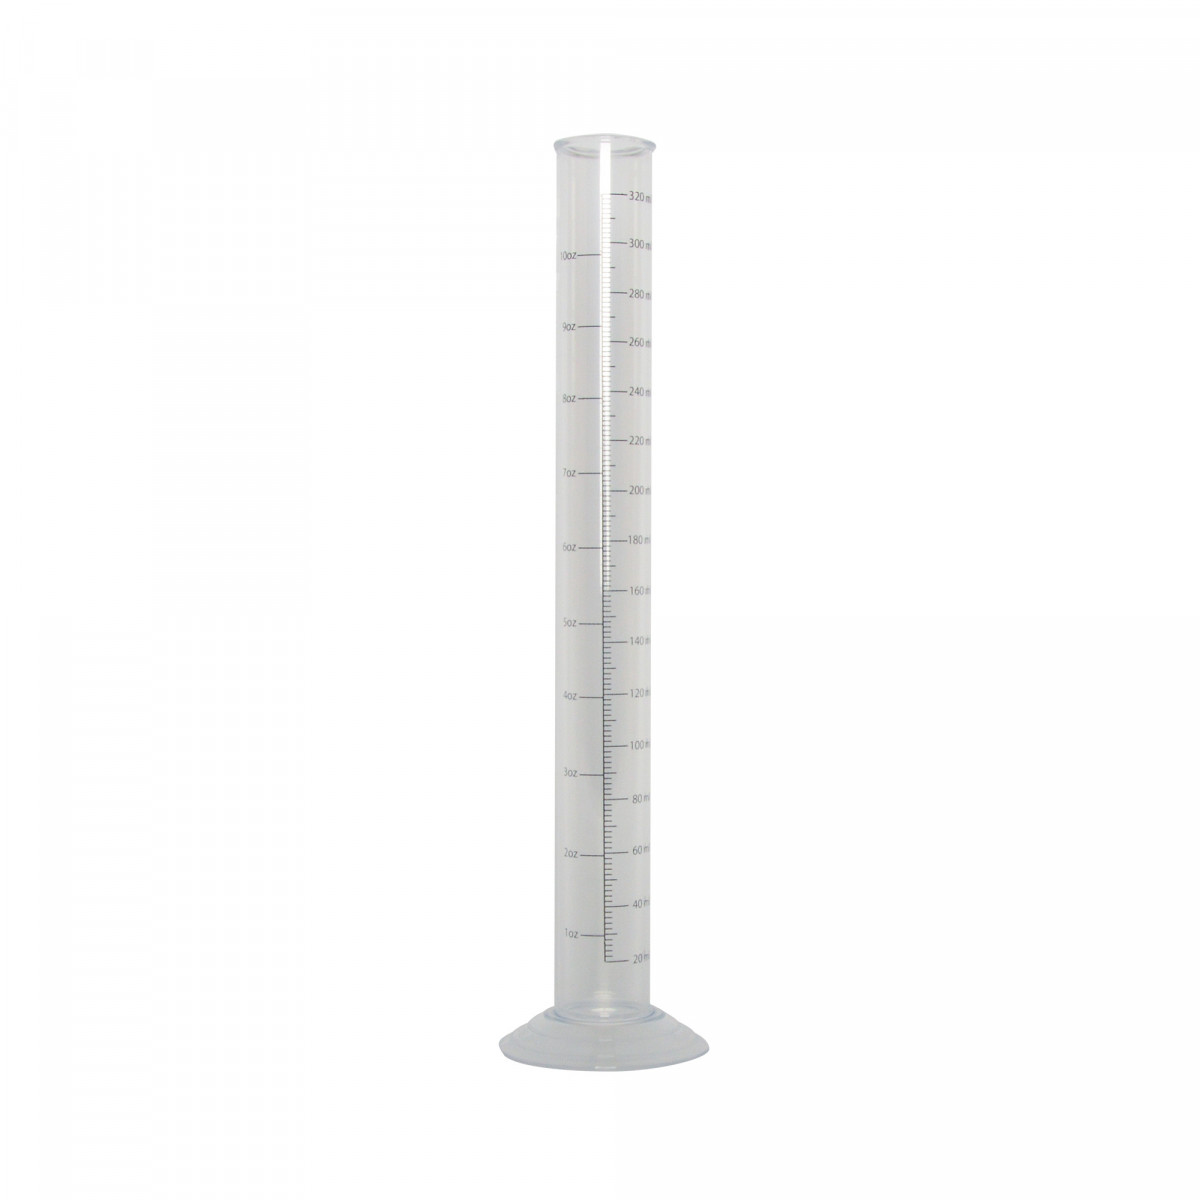 Graduated measuring cylinder 320 ml – alcohol resistant plastic